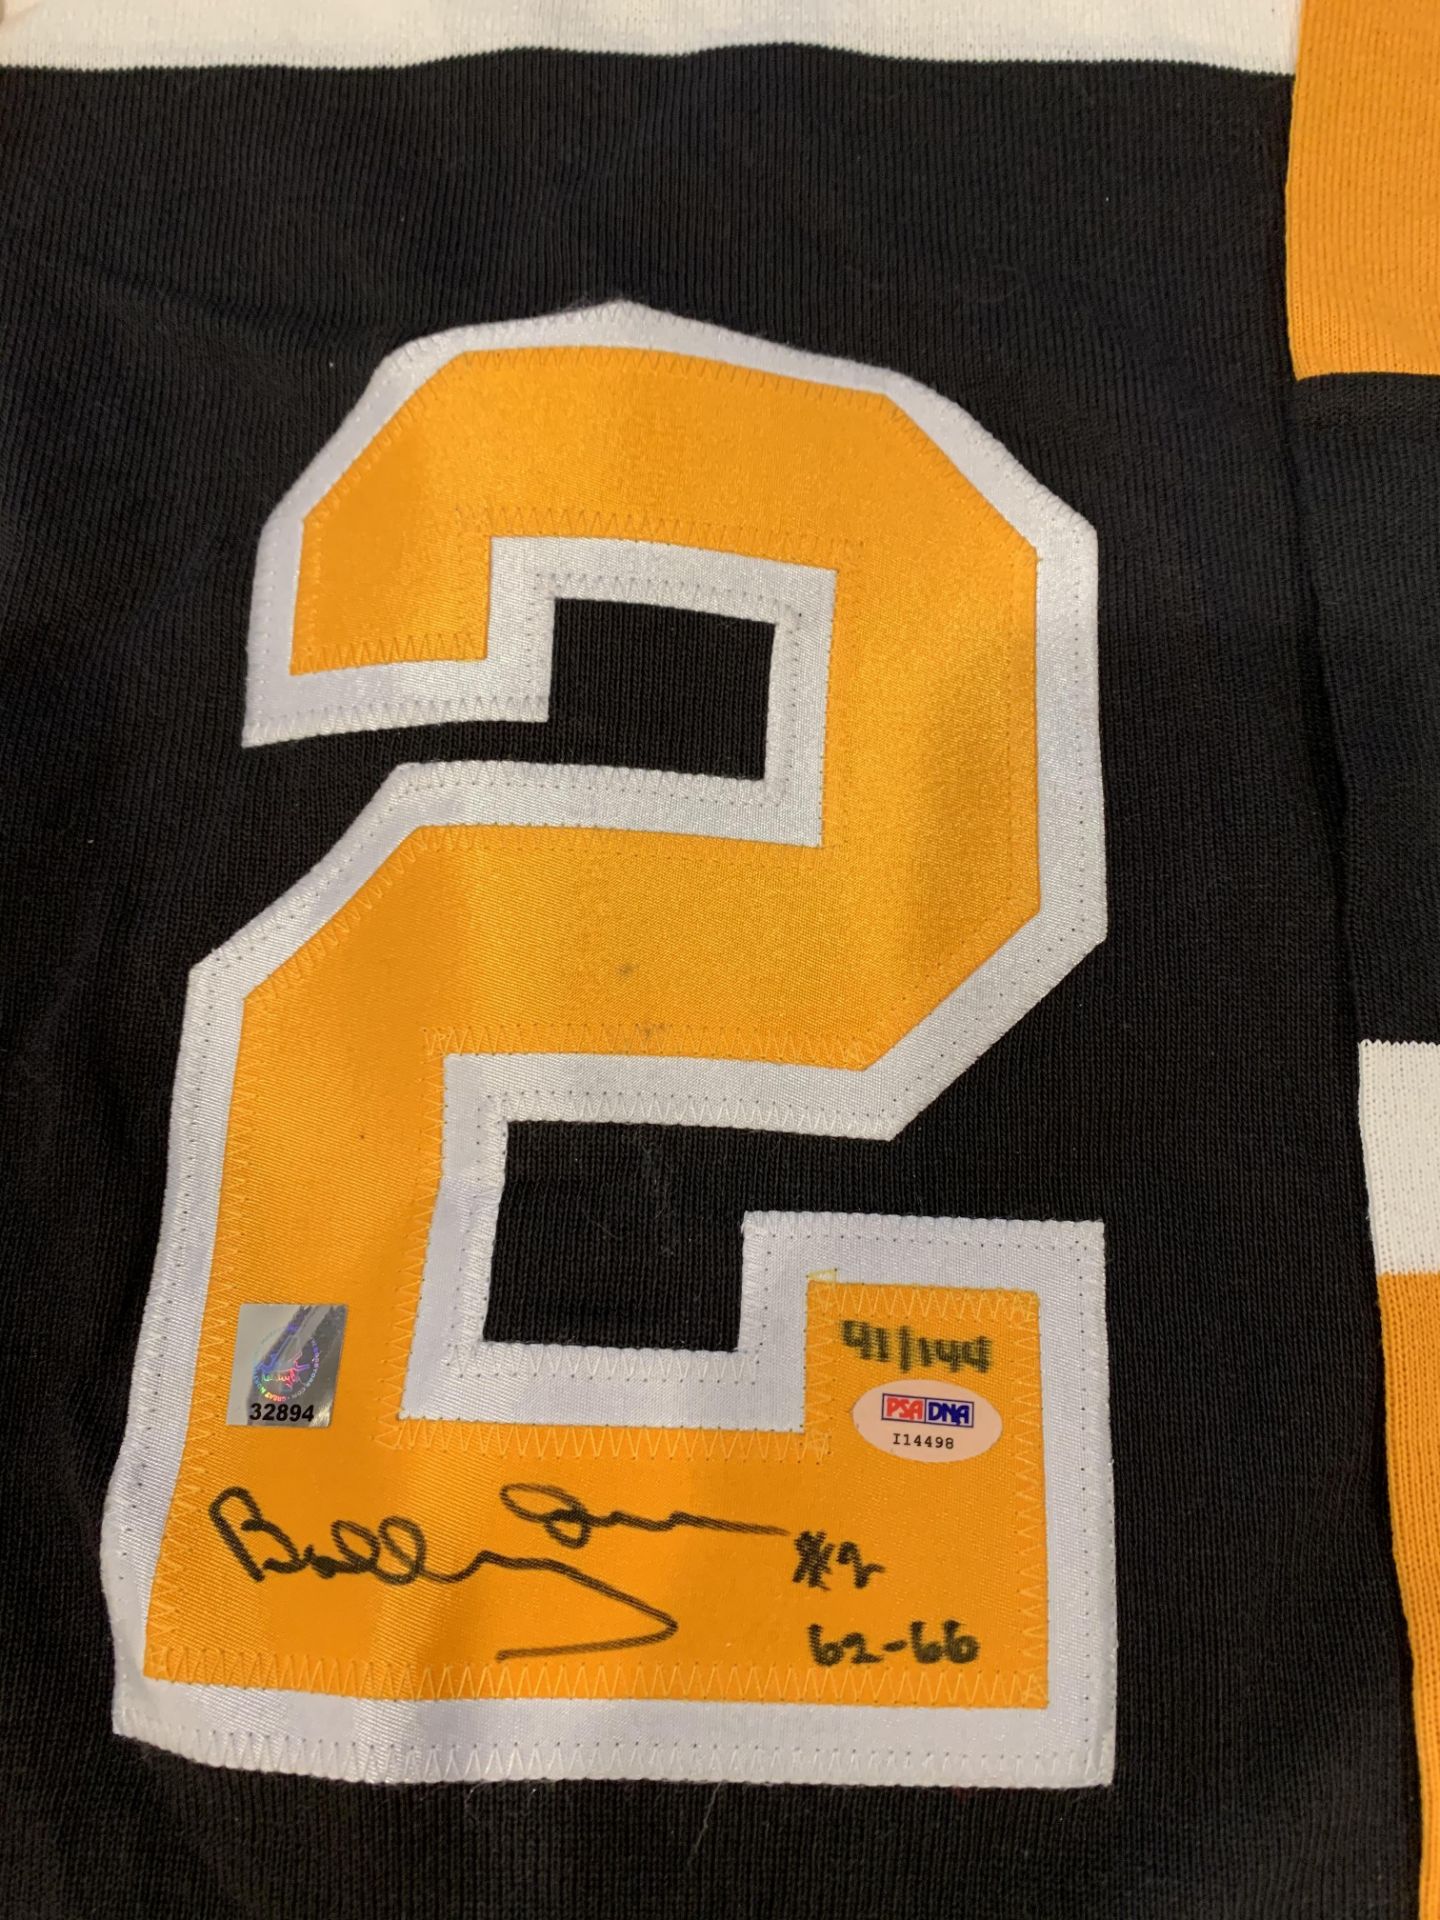 Bobby Orr Autographed Oshawa Generals Captains Jersey (Junior League) Not Game Worn. Has COA Tag. - Image 2 of 6